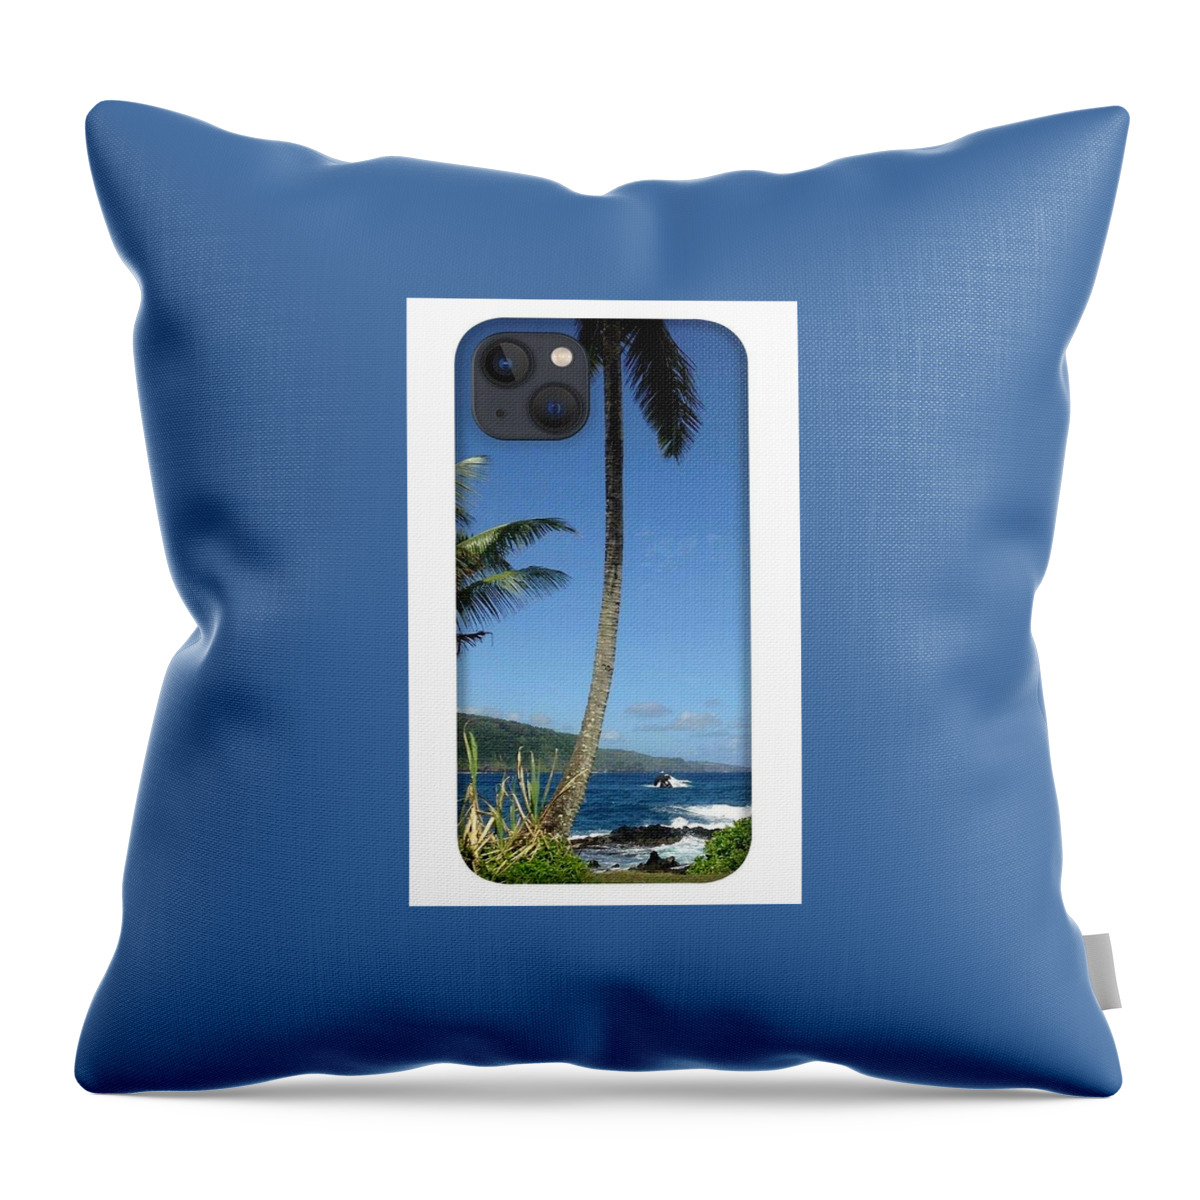  Throw Pillow featuring the photograph Sosobone Original 2 by Trevor A Smith